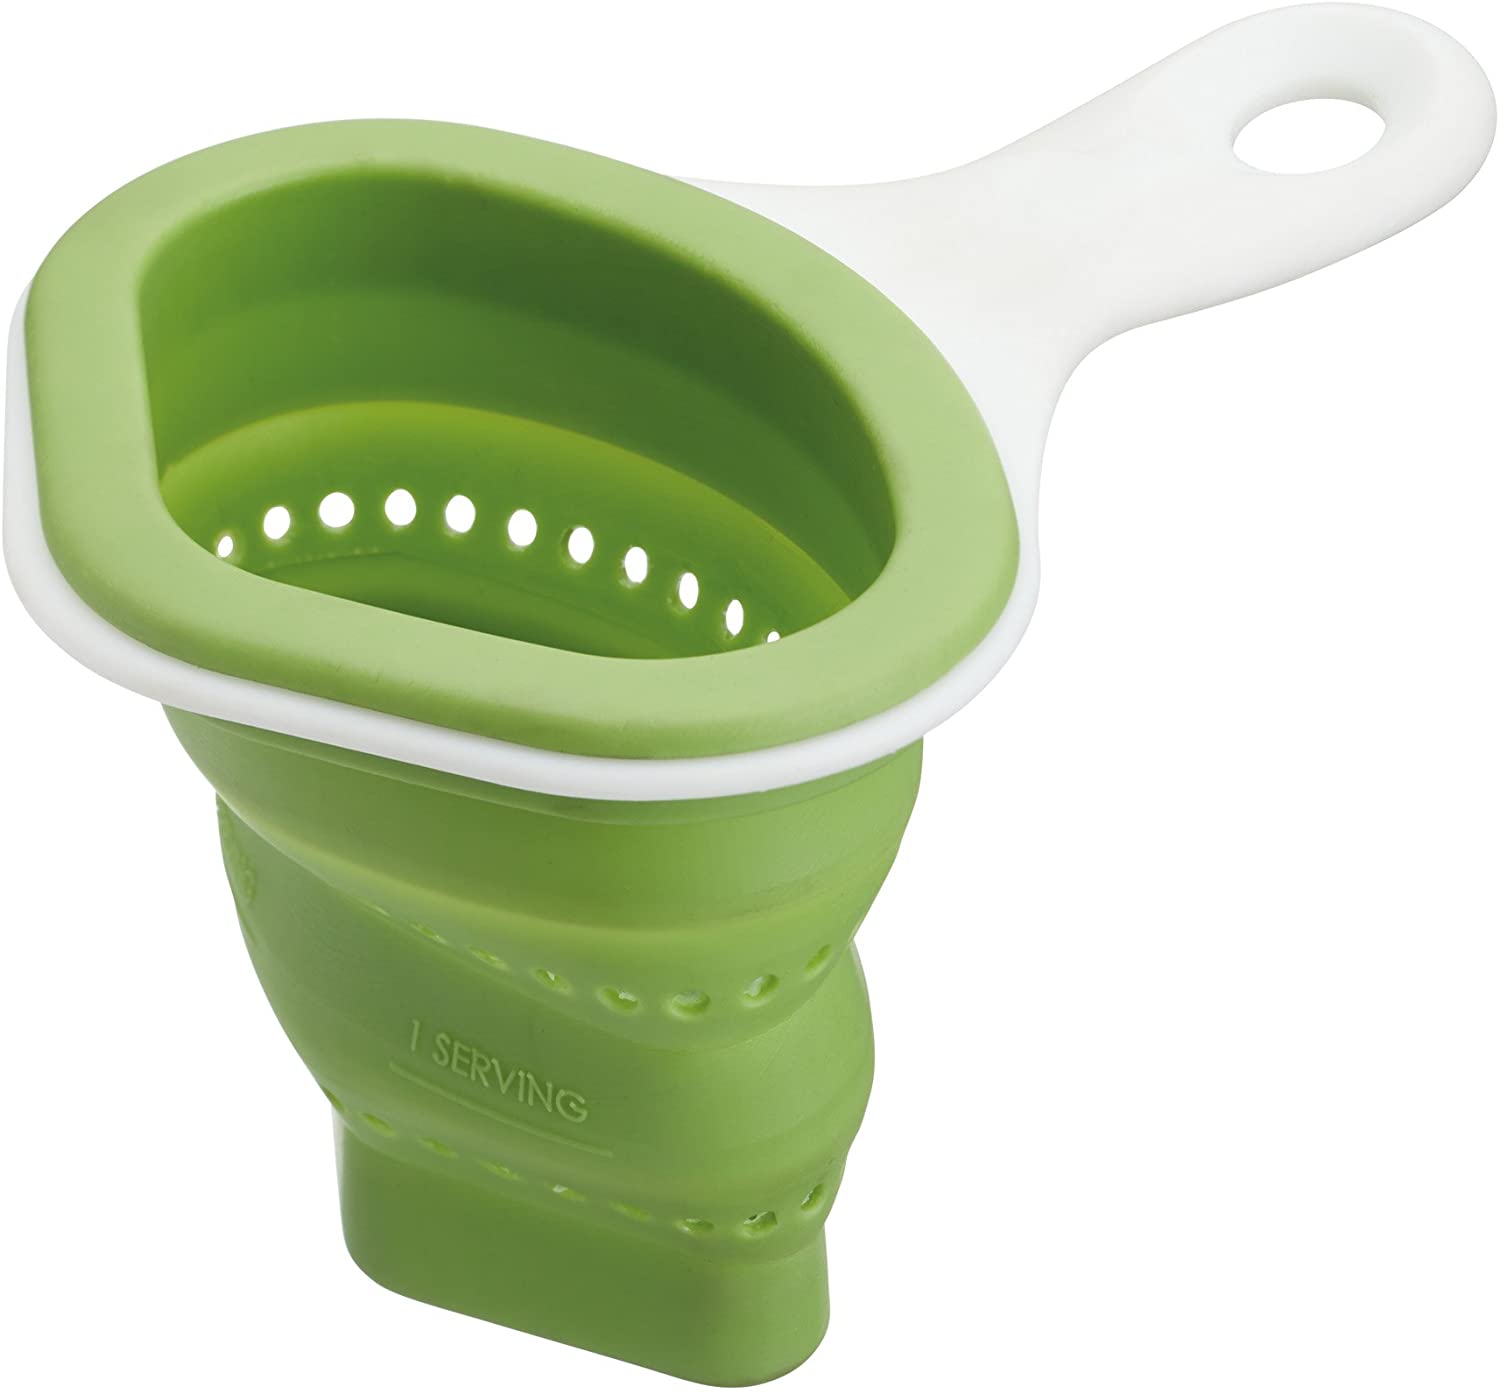 Kitchen Craft Healthy Eating 3 in 1 Pasta Scoop, Cooker, Draining Basket, Silicone, Green, 13 x 17.5 x 3.5 cm